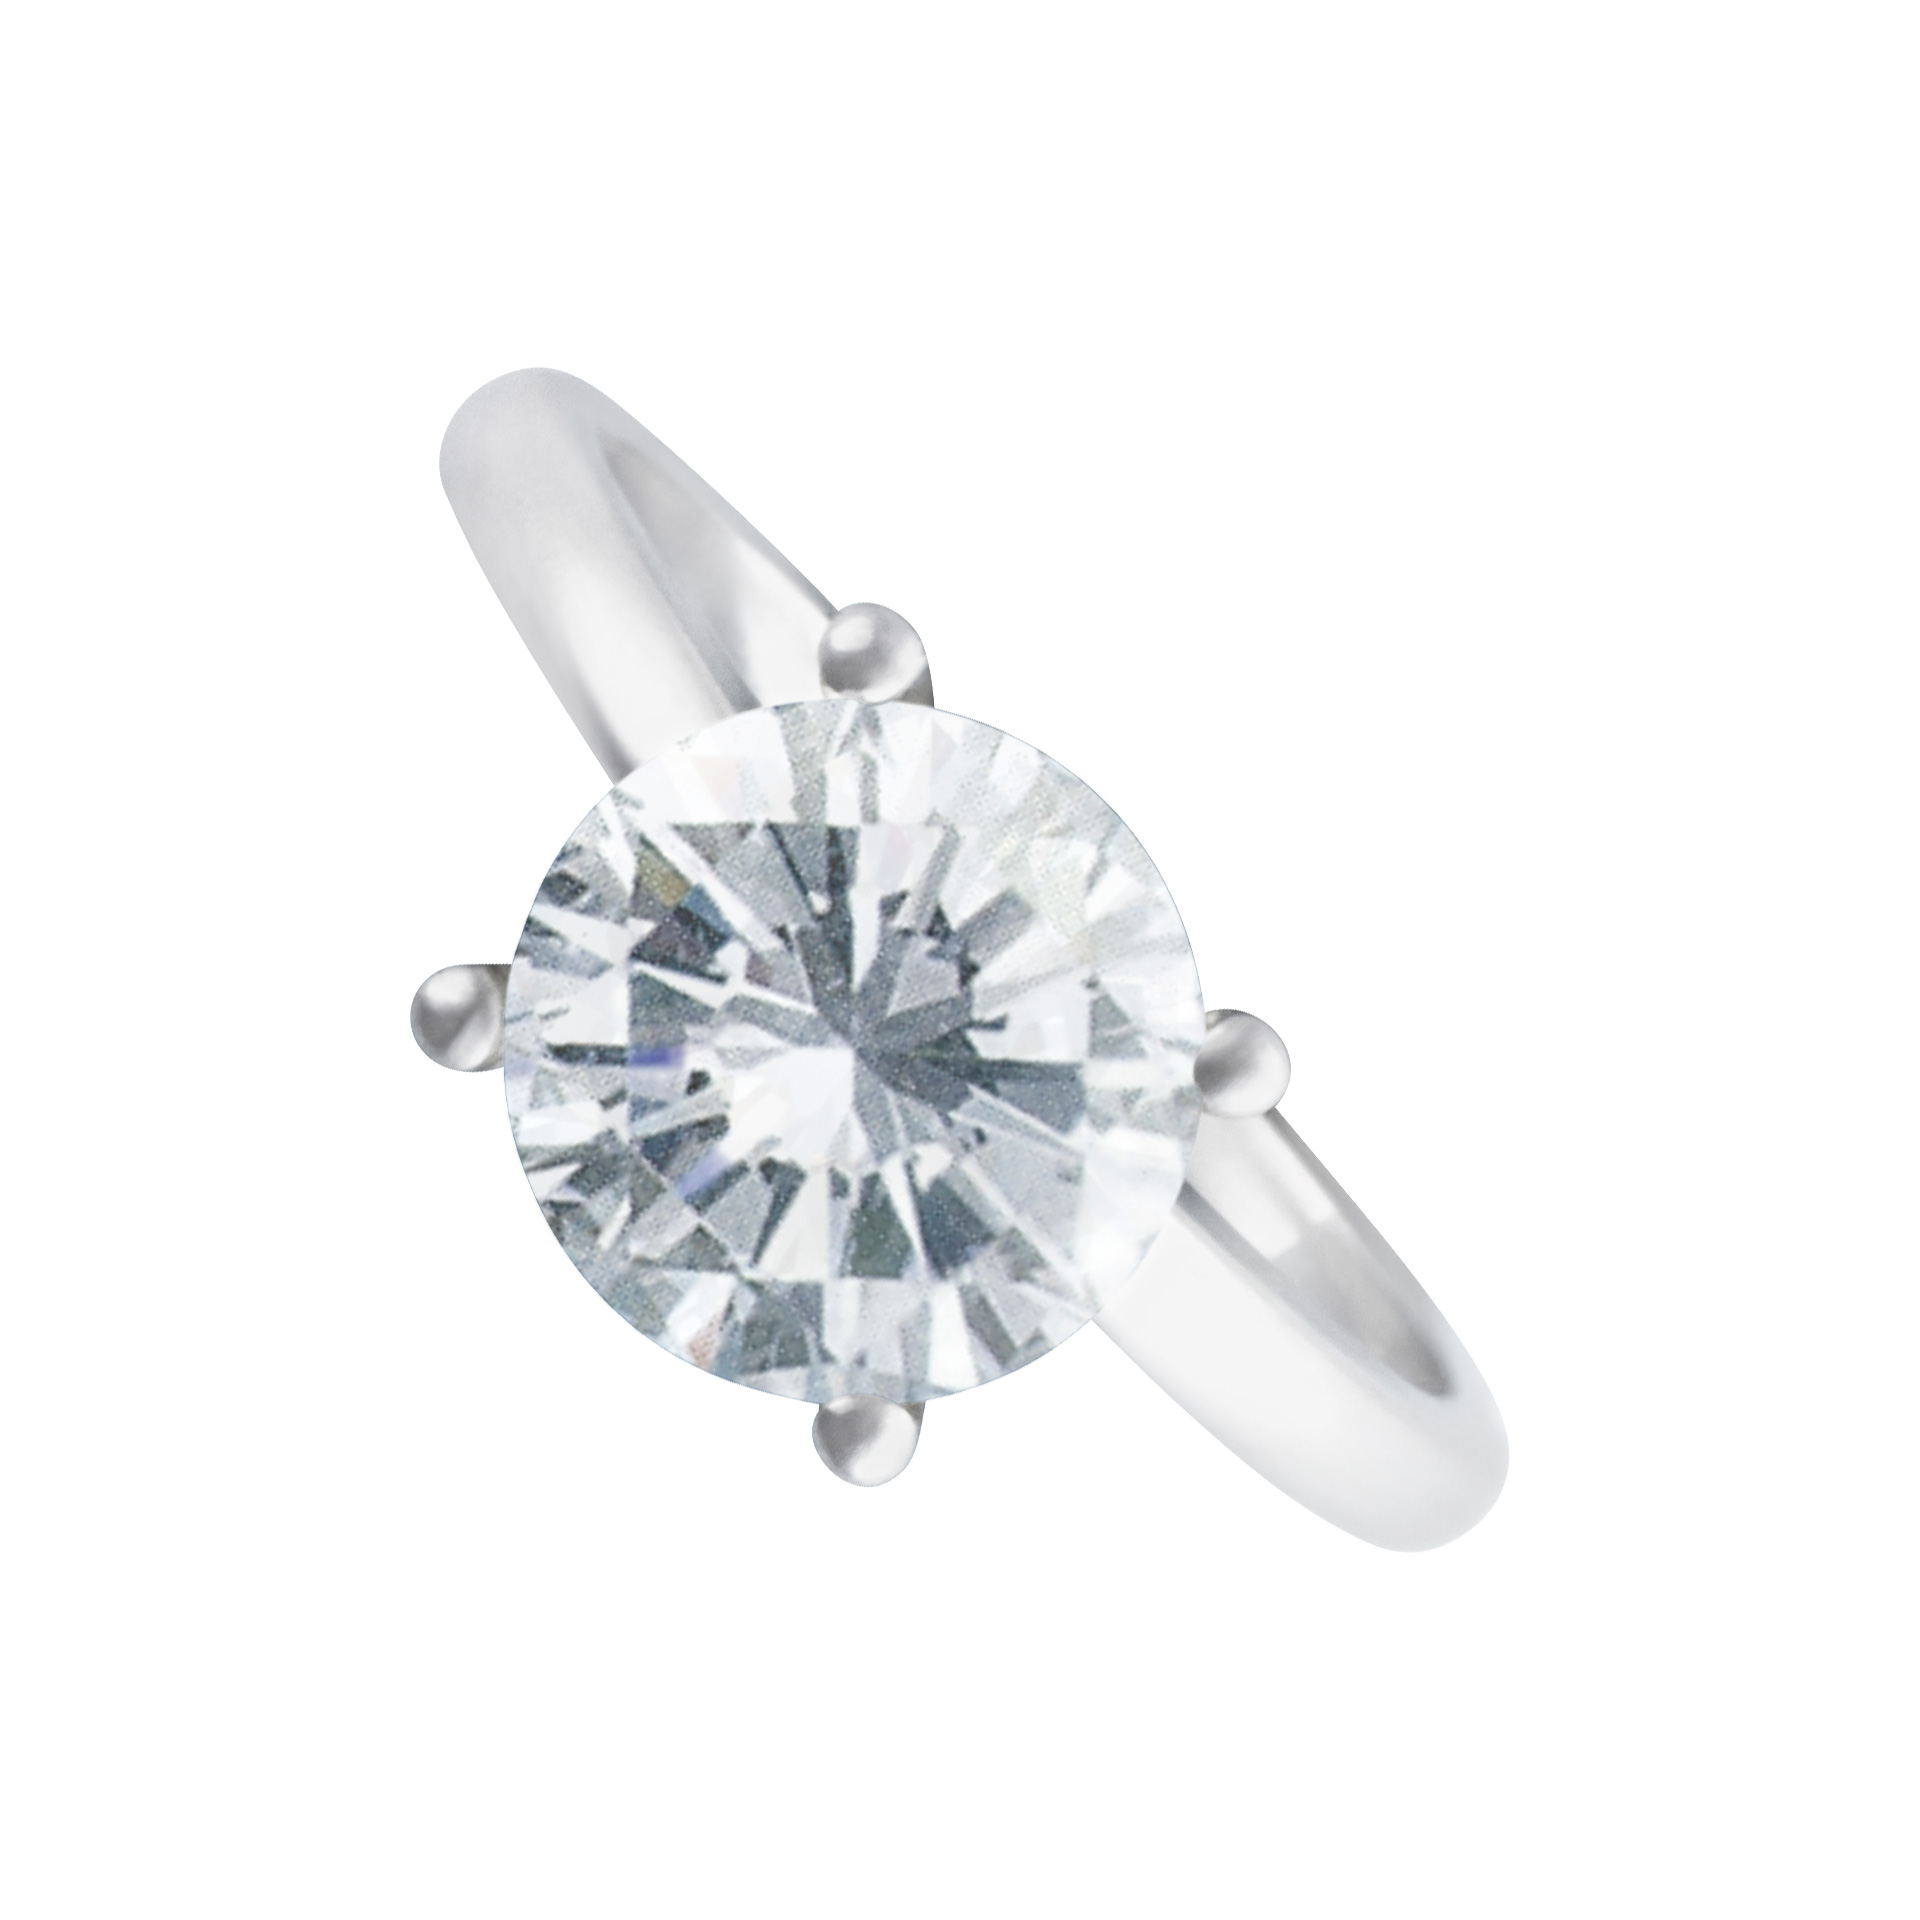 GIA Certified Round Diamond 1.50 Carats (N Color, VS2 Clarity)  ring. image 1